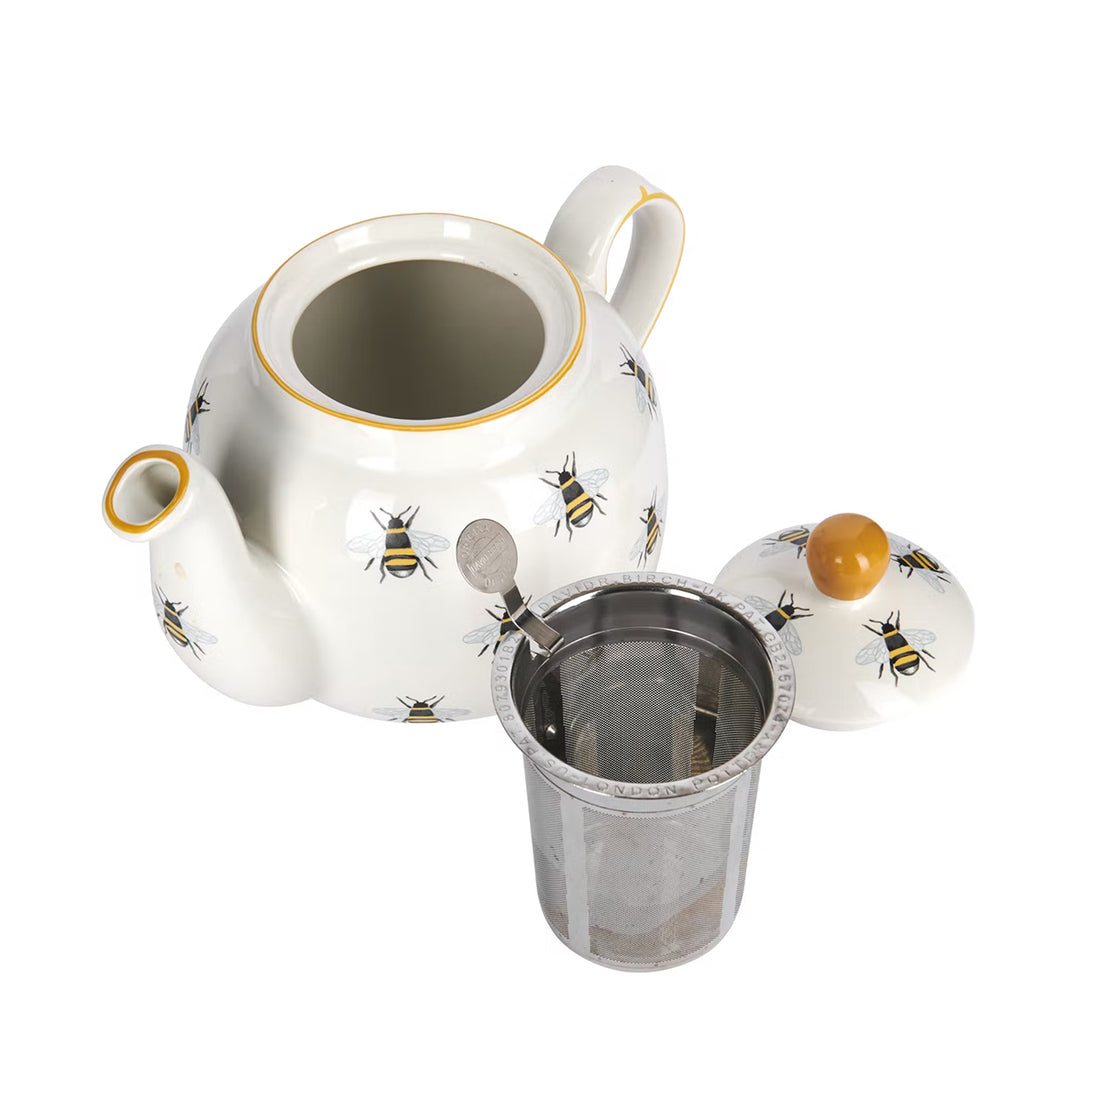 London Pottery, London Pottery Farmhouse 4 Cup Teapot and Infuser - Bee, Redber Coffee